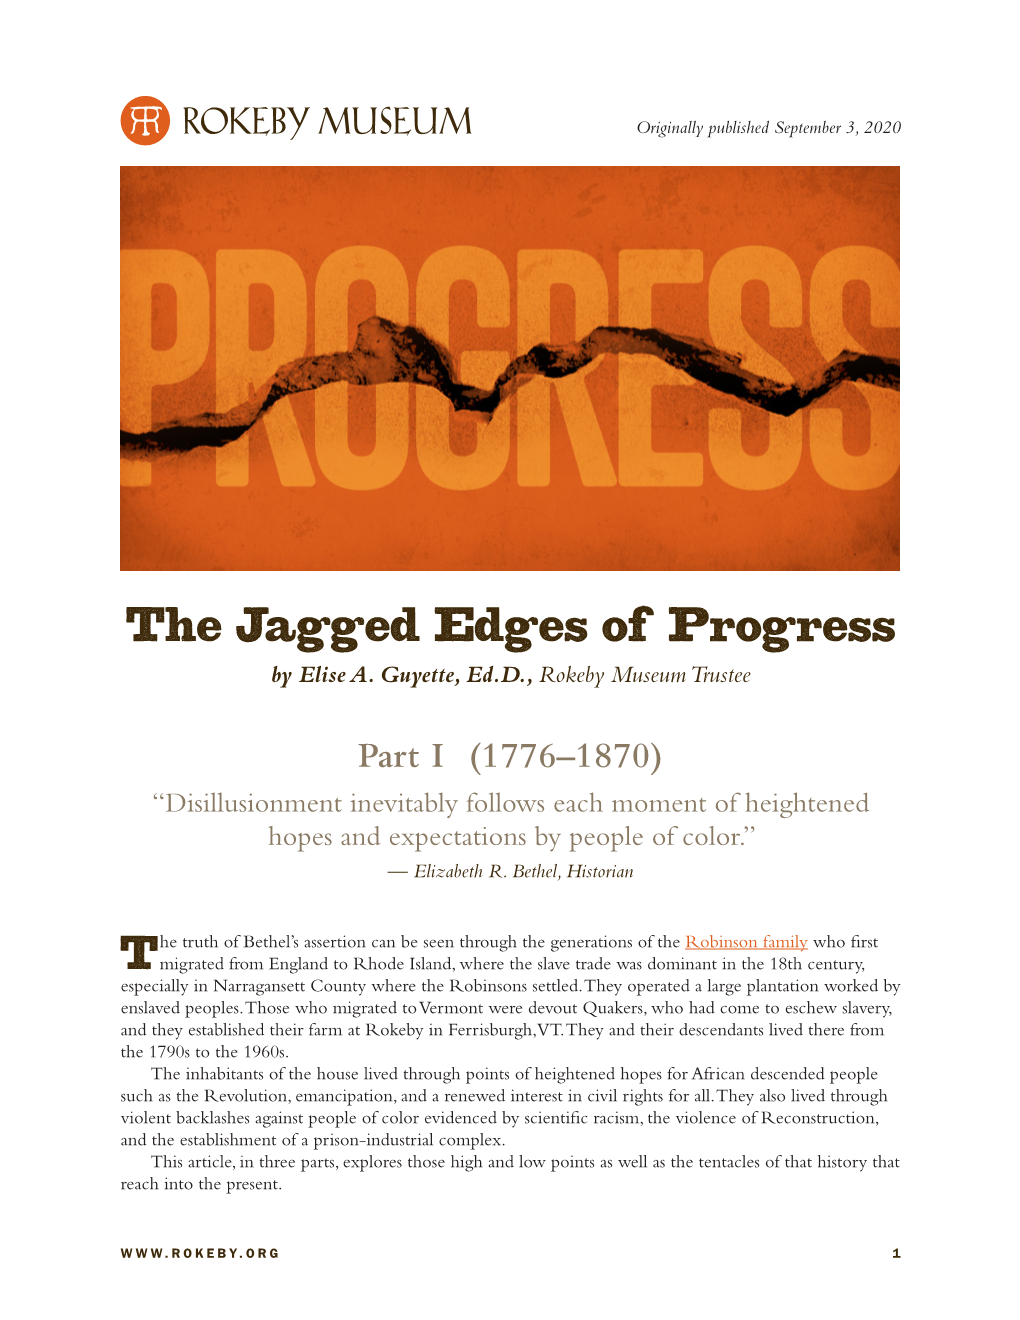 The Jagged Edges of Progress by Elise A